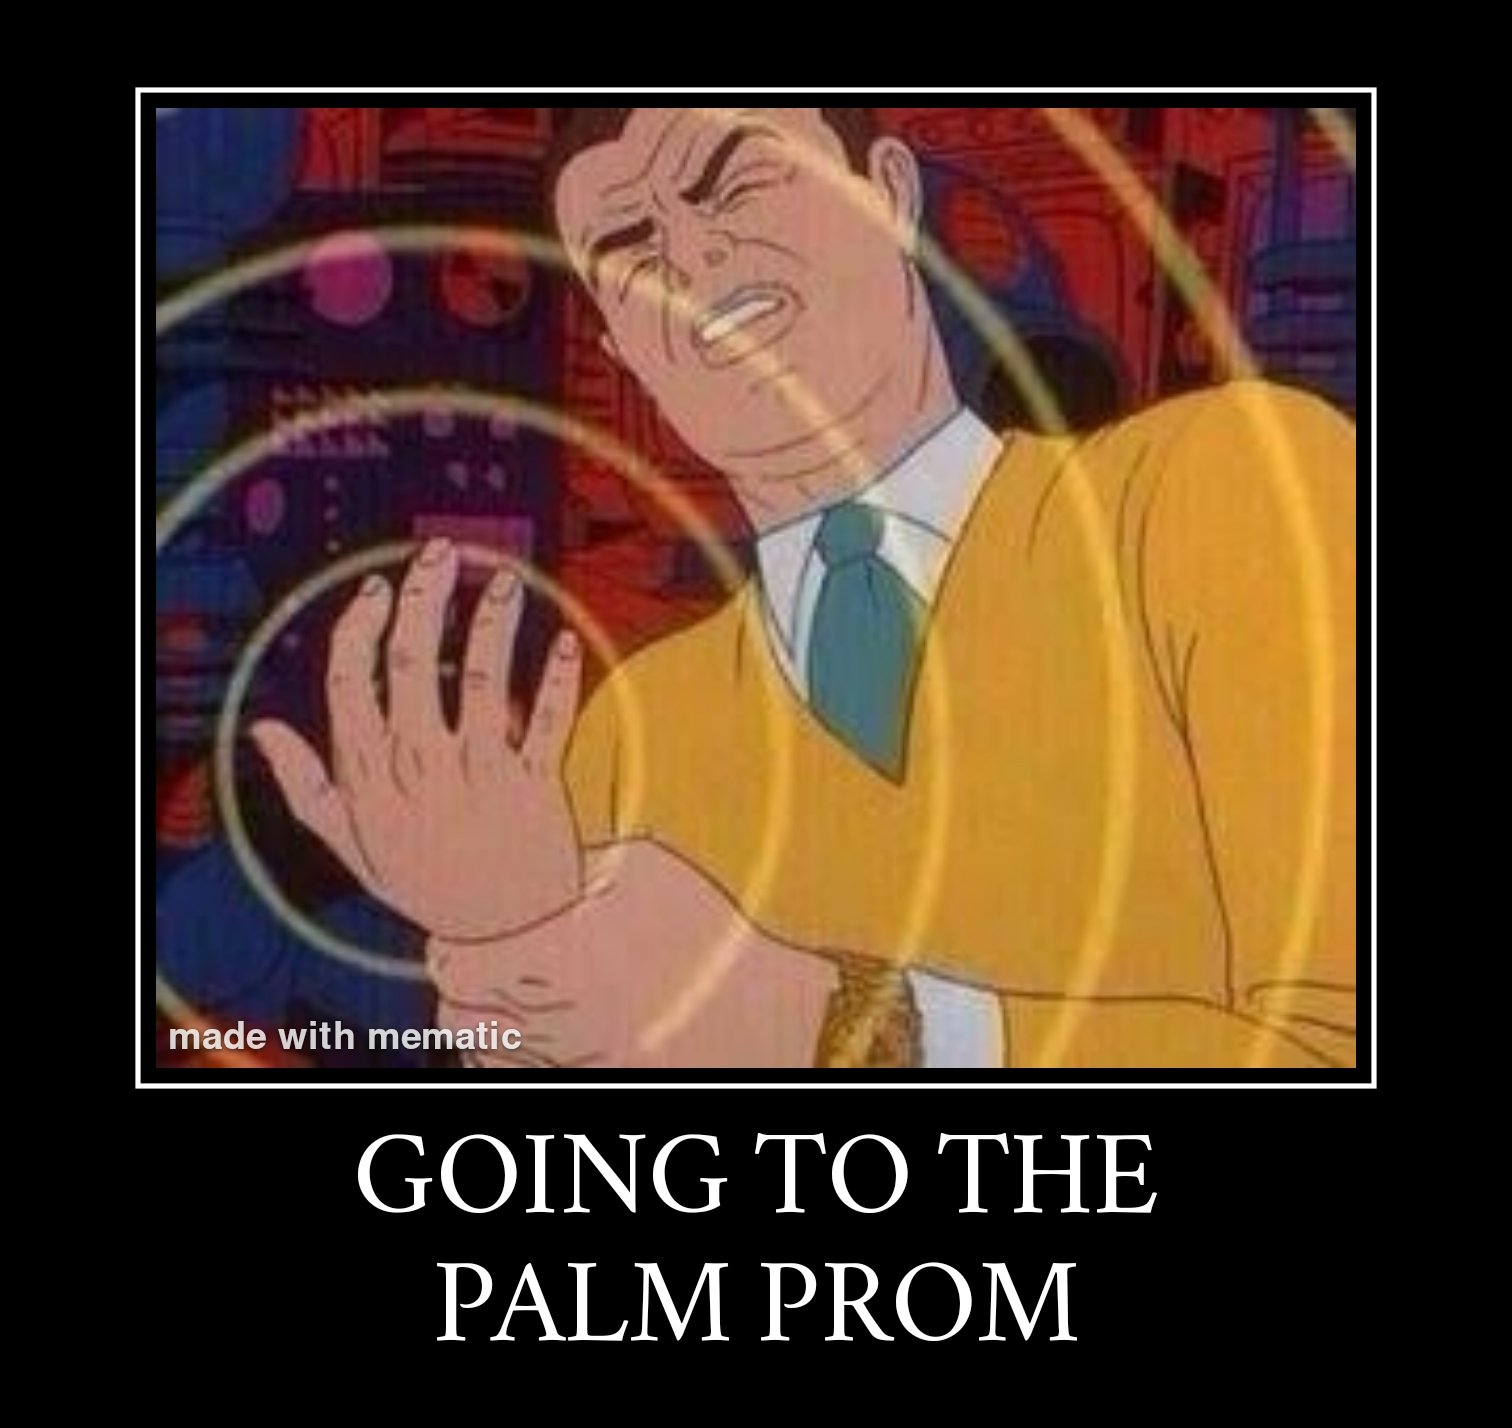 Going to the palm prom